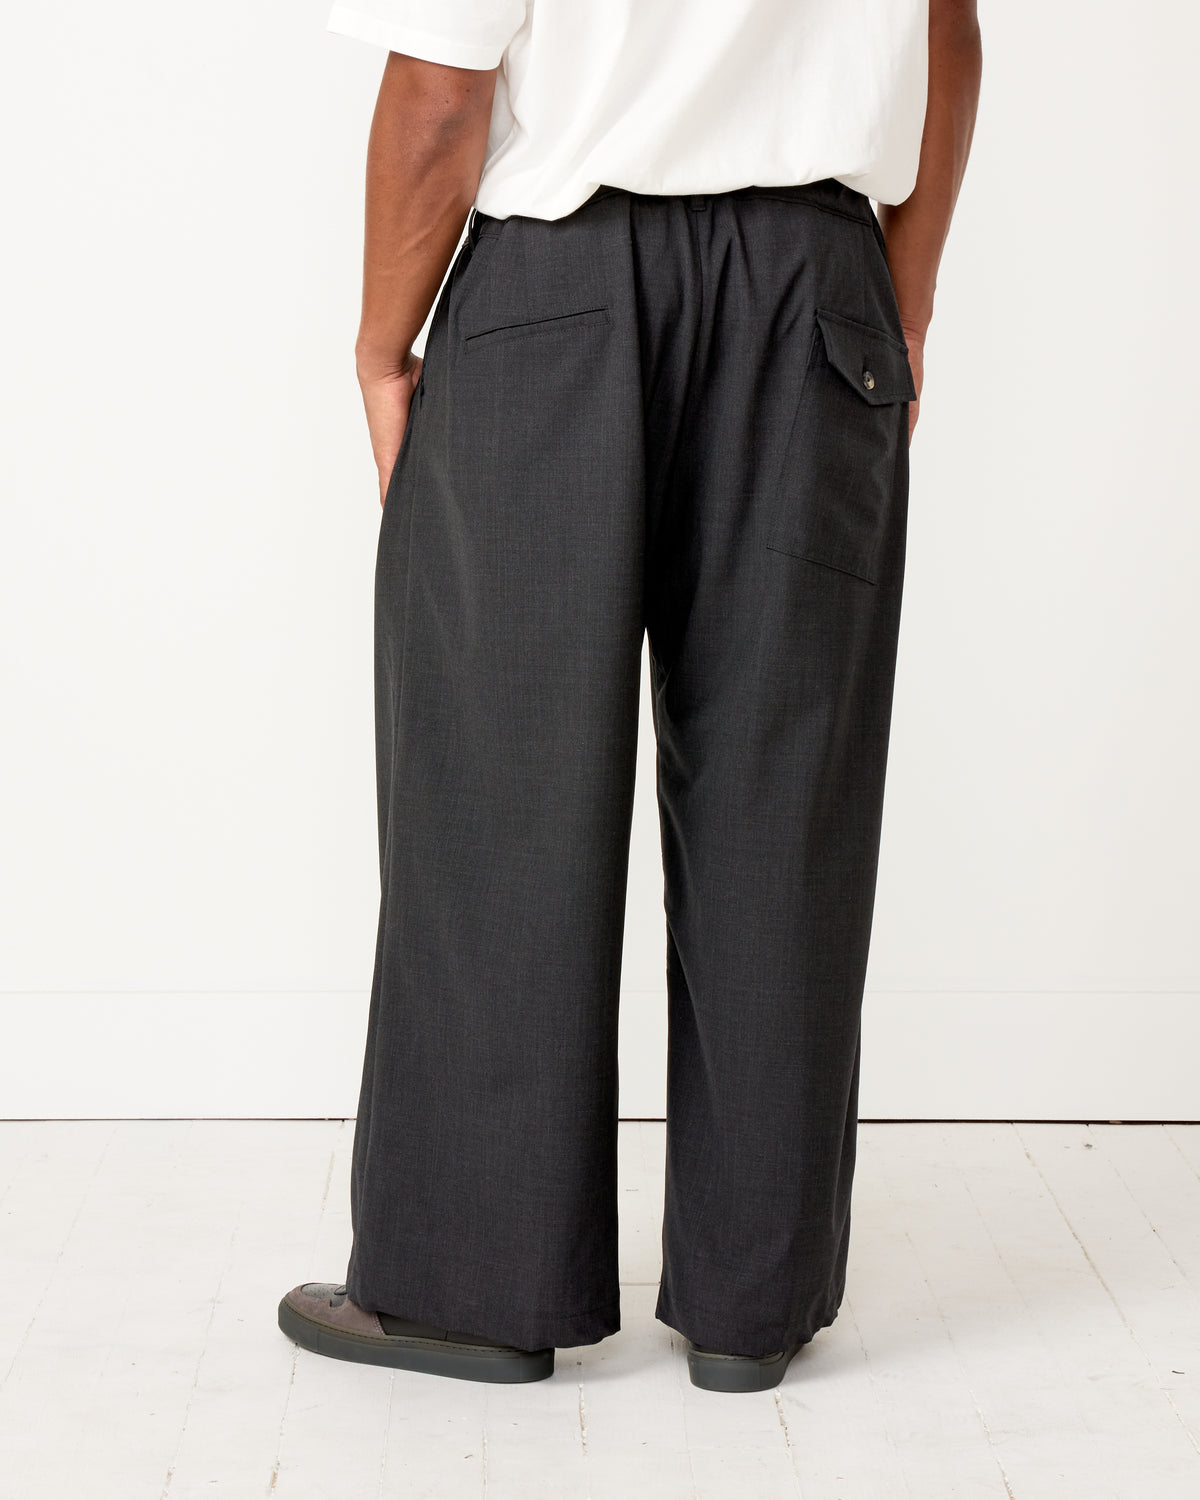 Shop our online store for trendy and useful Essential Hakama Pant